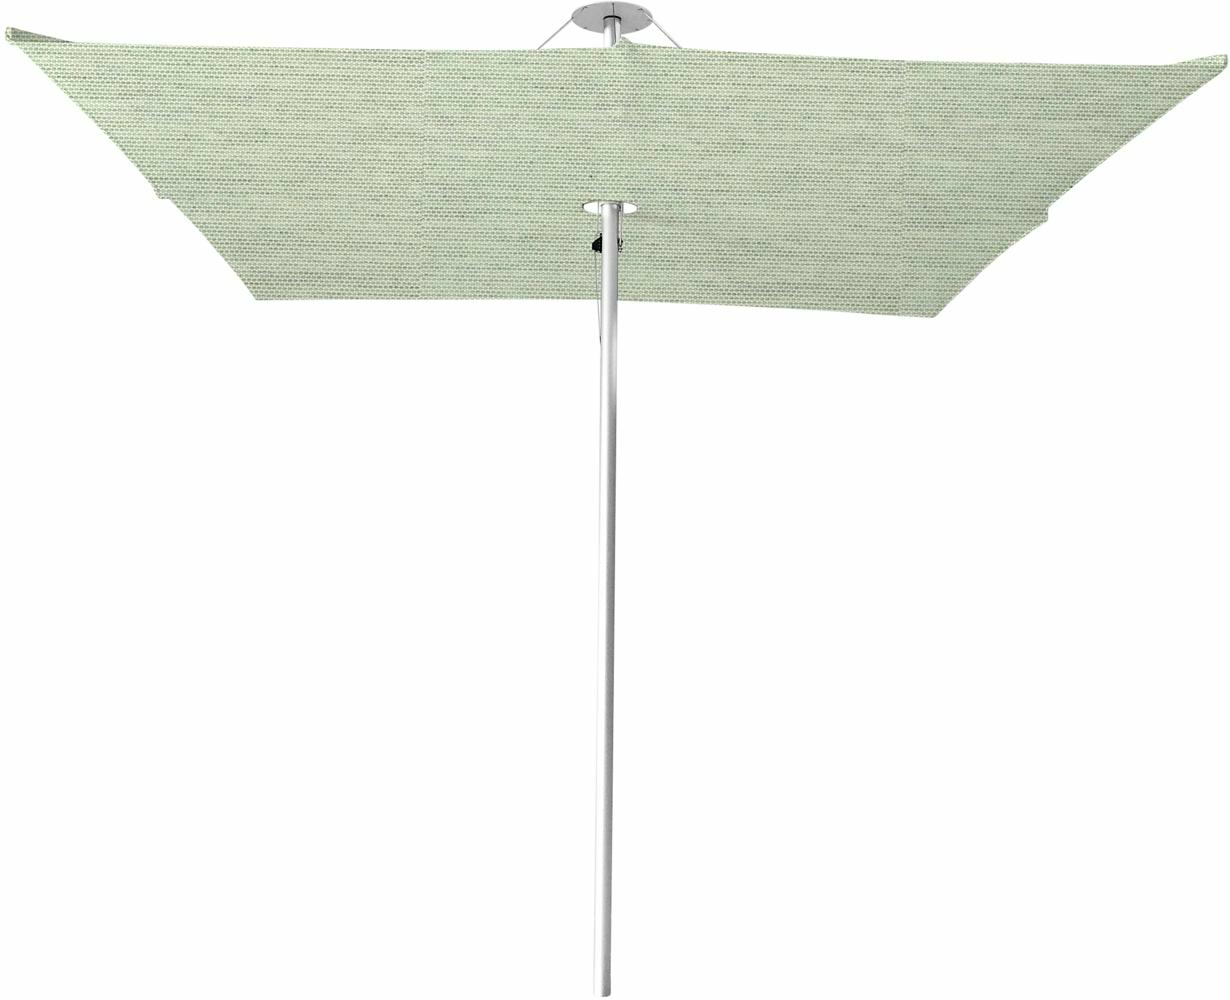 Infina center post umbrella, 3 m square, with frame in Aluminum and Colorum Mint canopy.